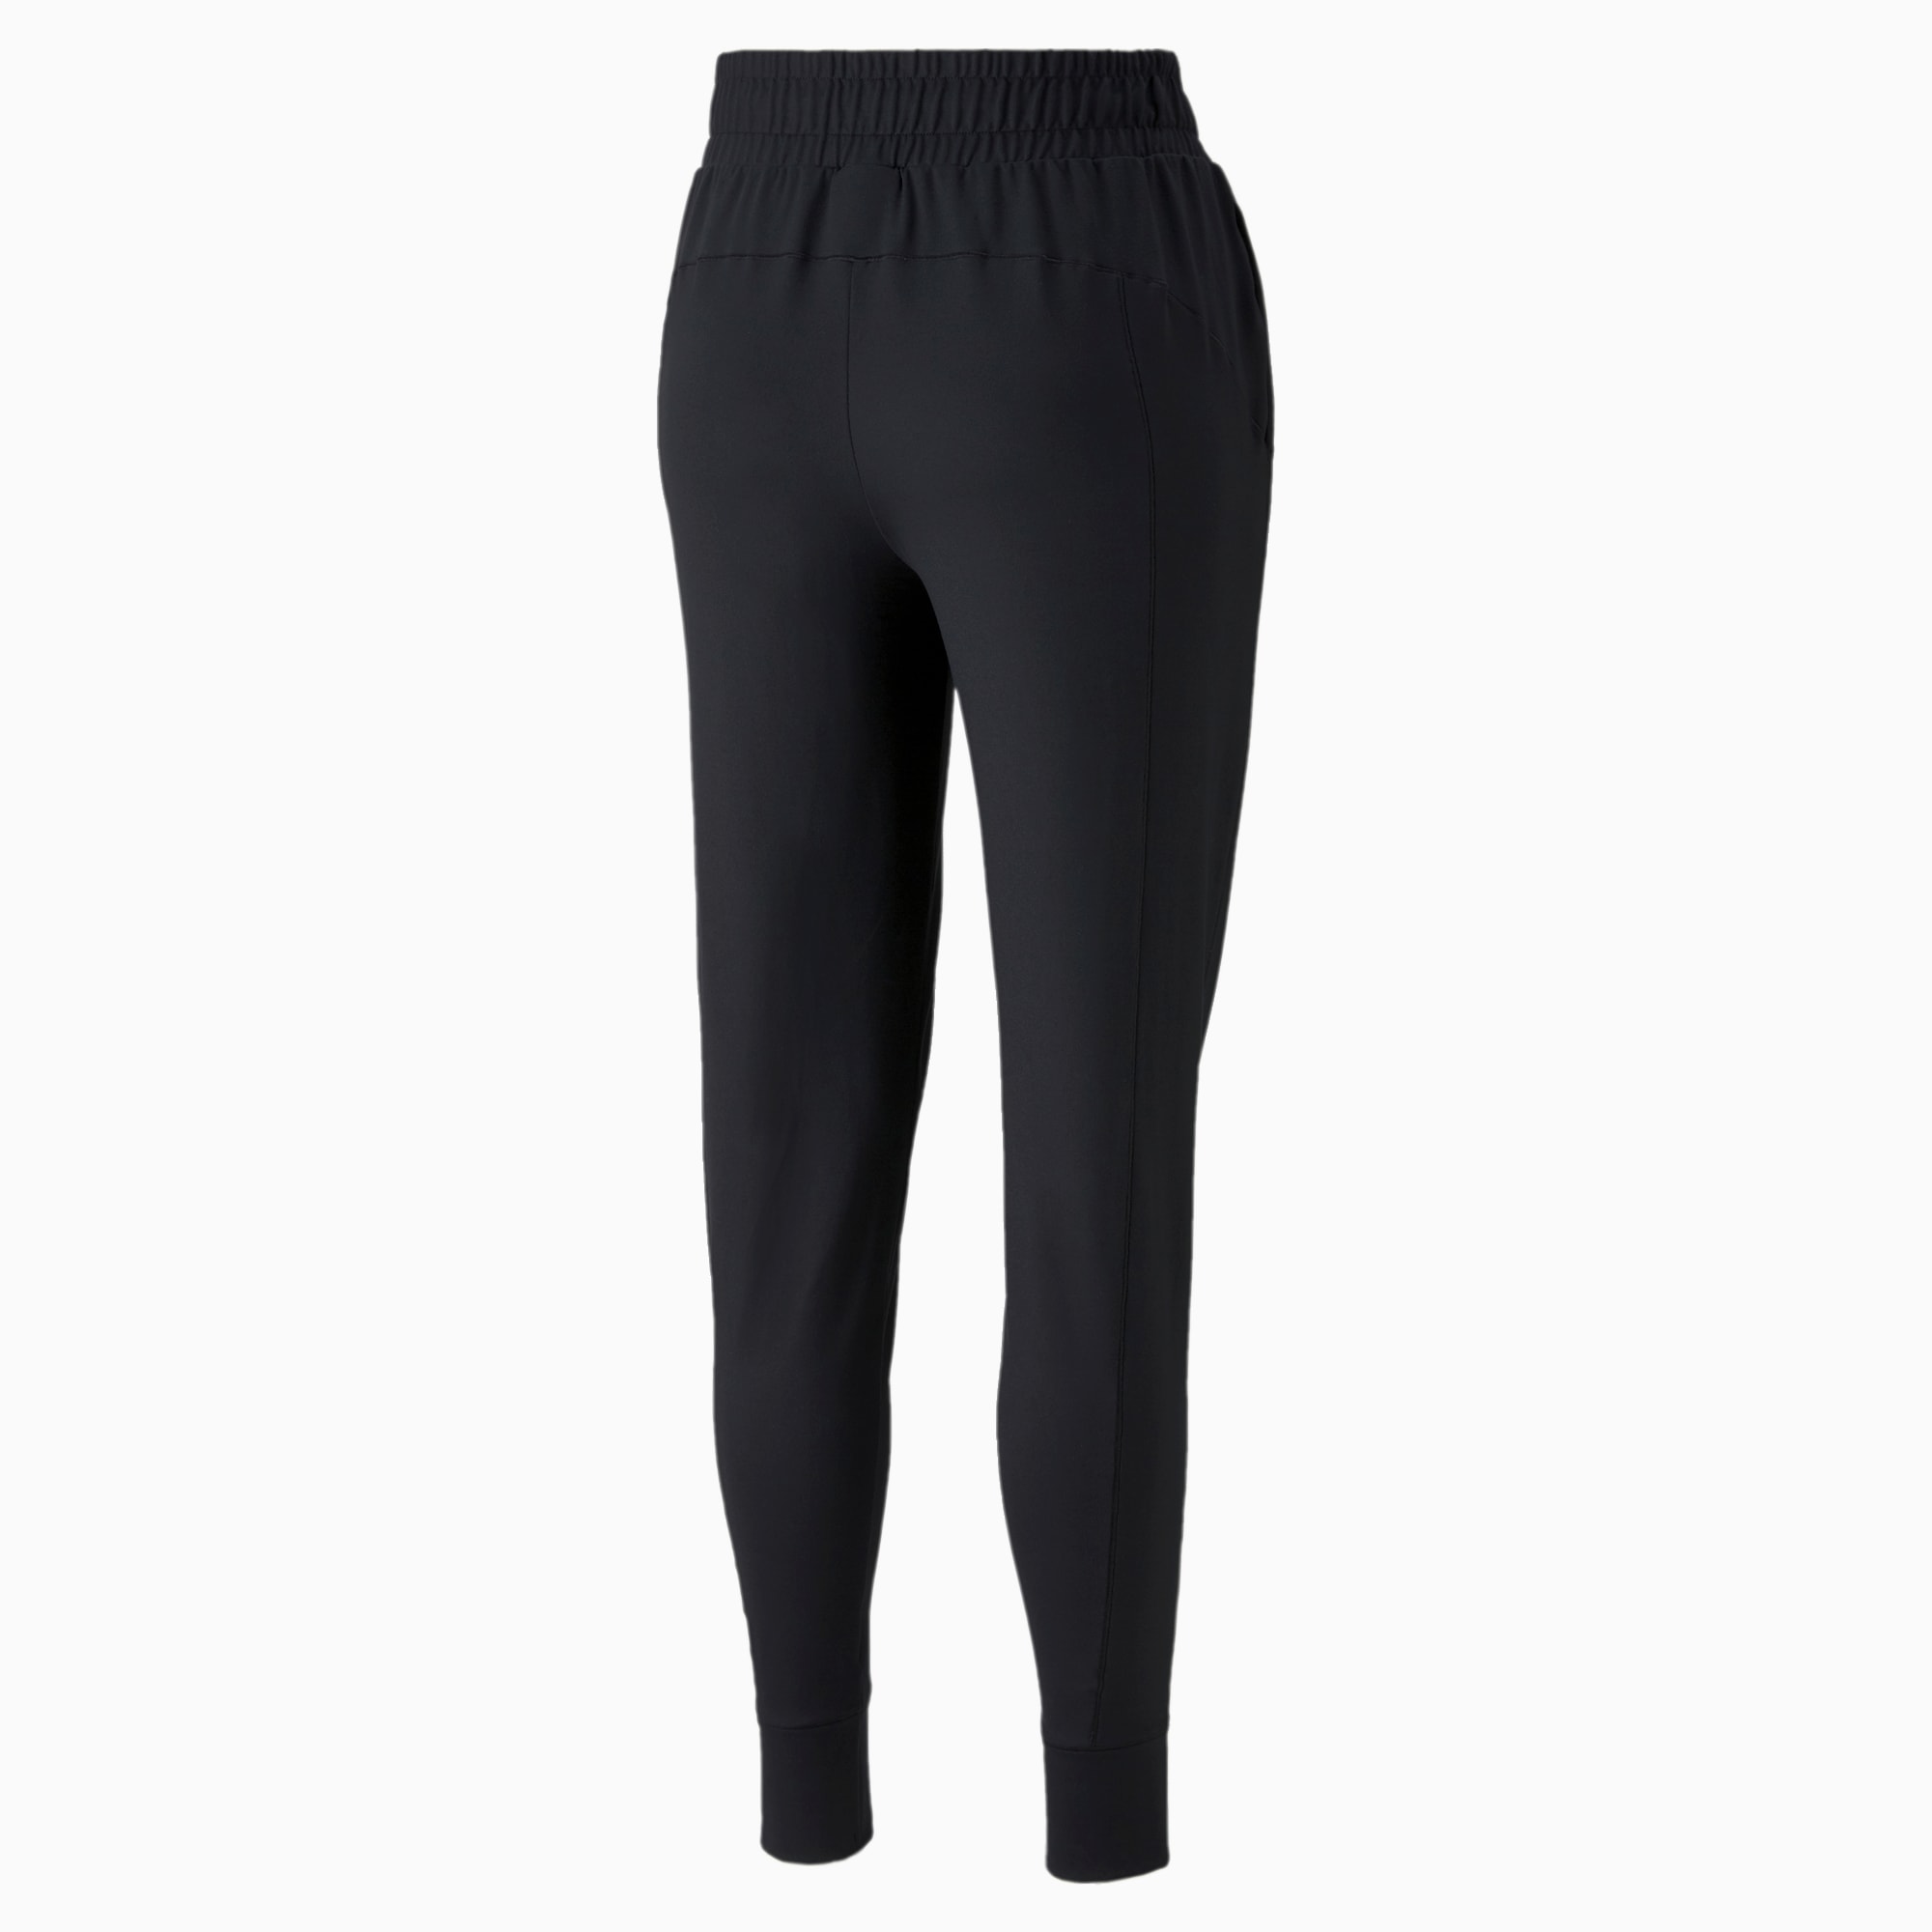 Studio Foundations Knitted Women's Training Pants